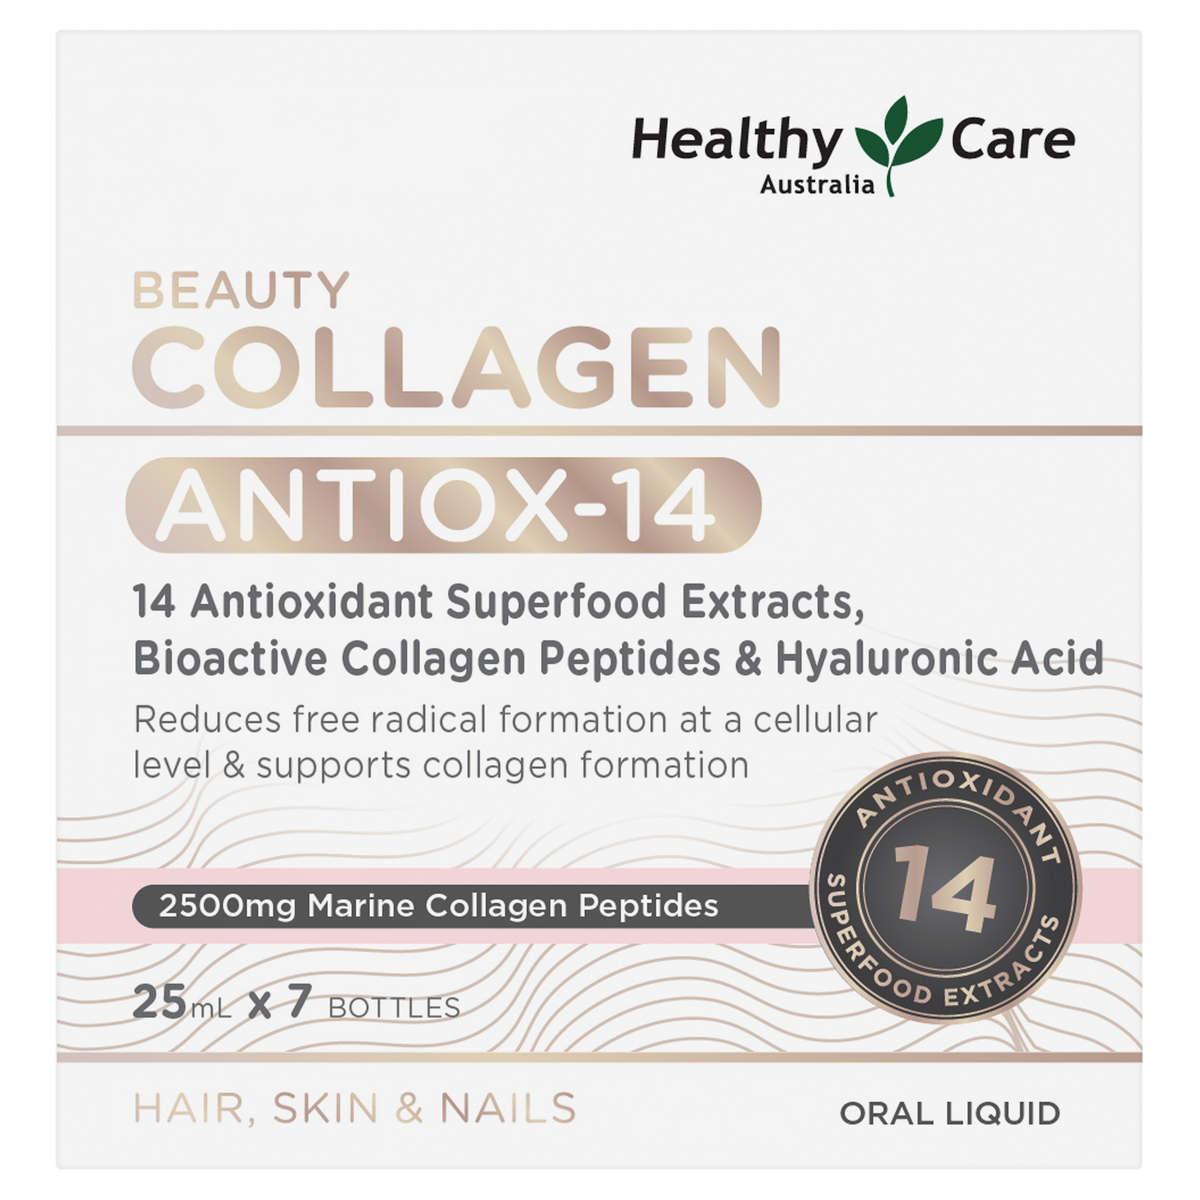 Healthy Care Beauty Collagen Antiox-14 PLUS Shots 25mL x 7 Pack